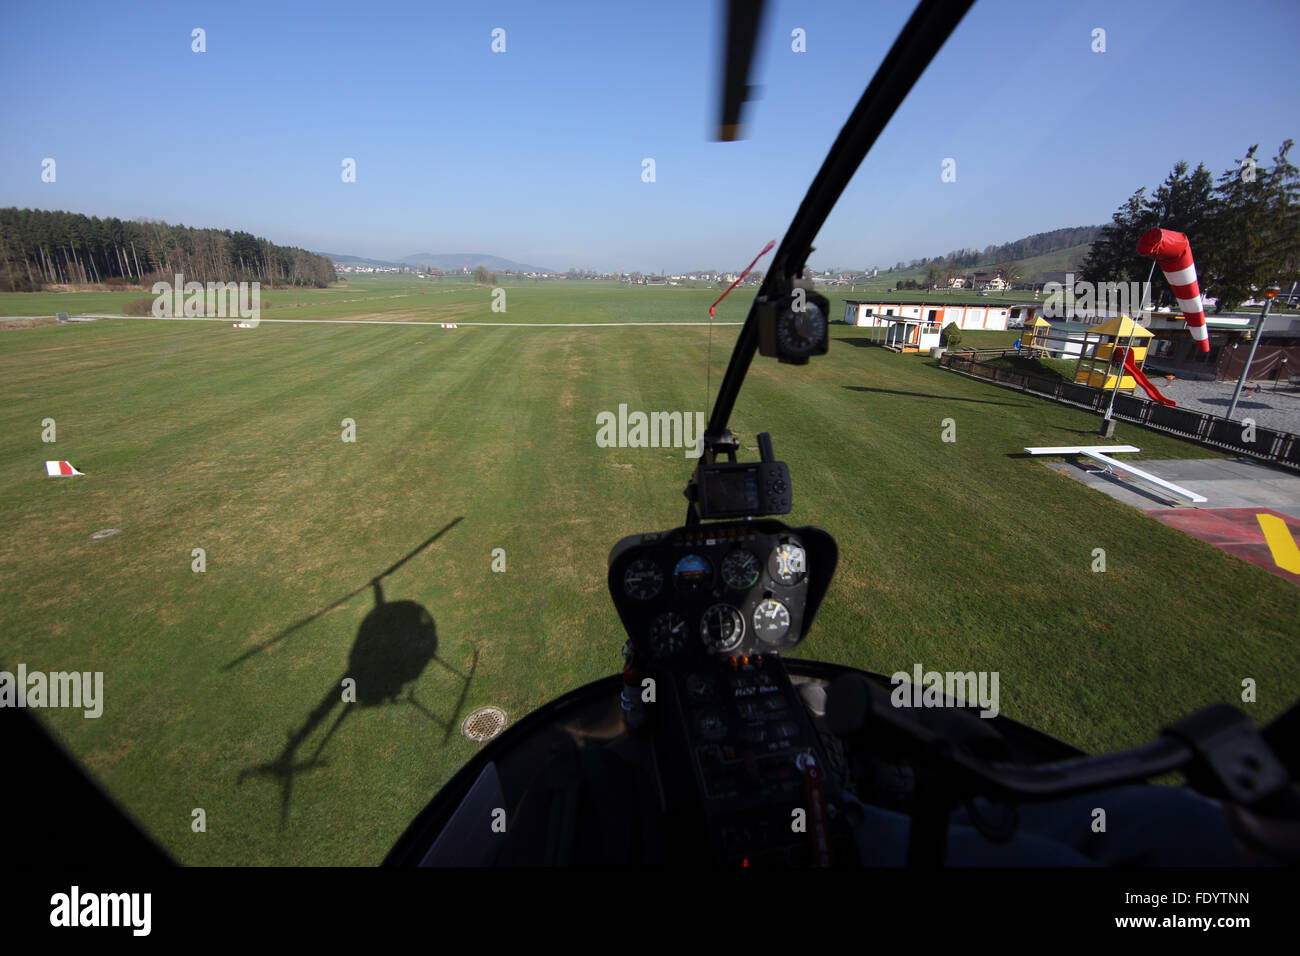 Beromuenster, Switzerland, view from the cockpit of a helicopter during a flight Stock Photo